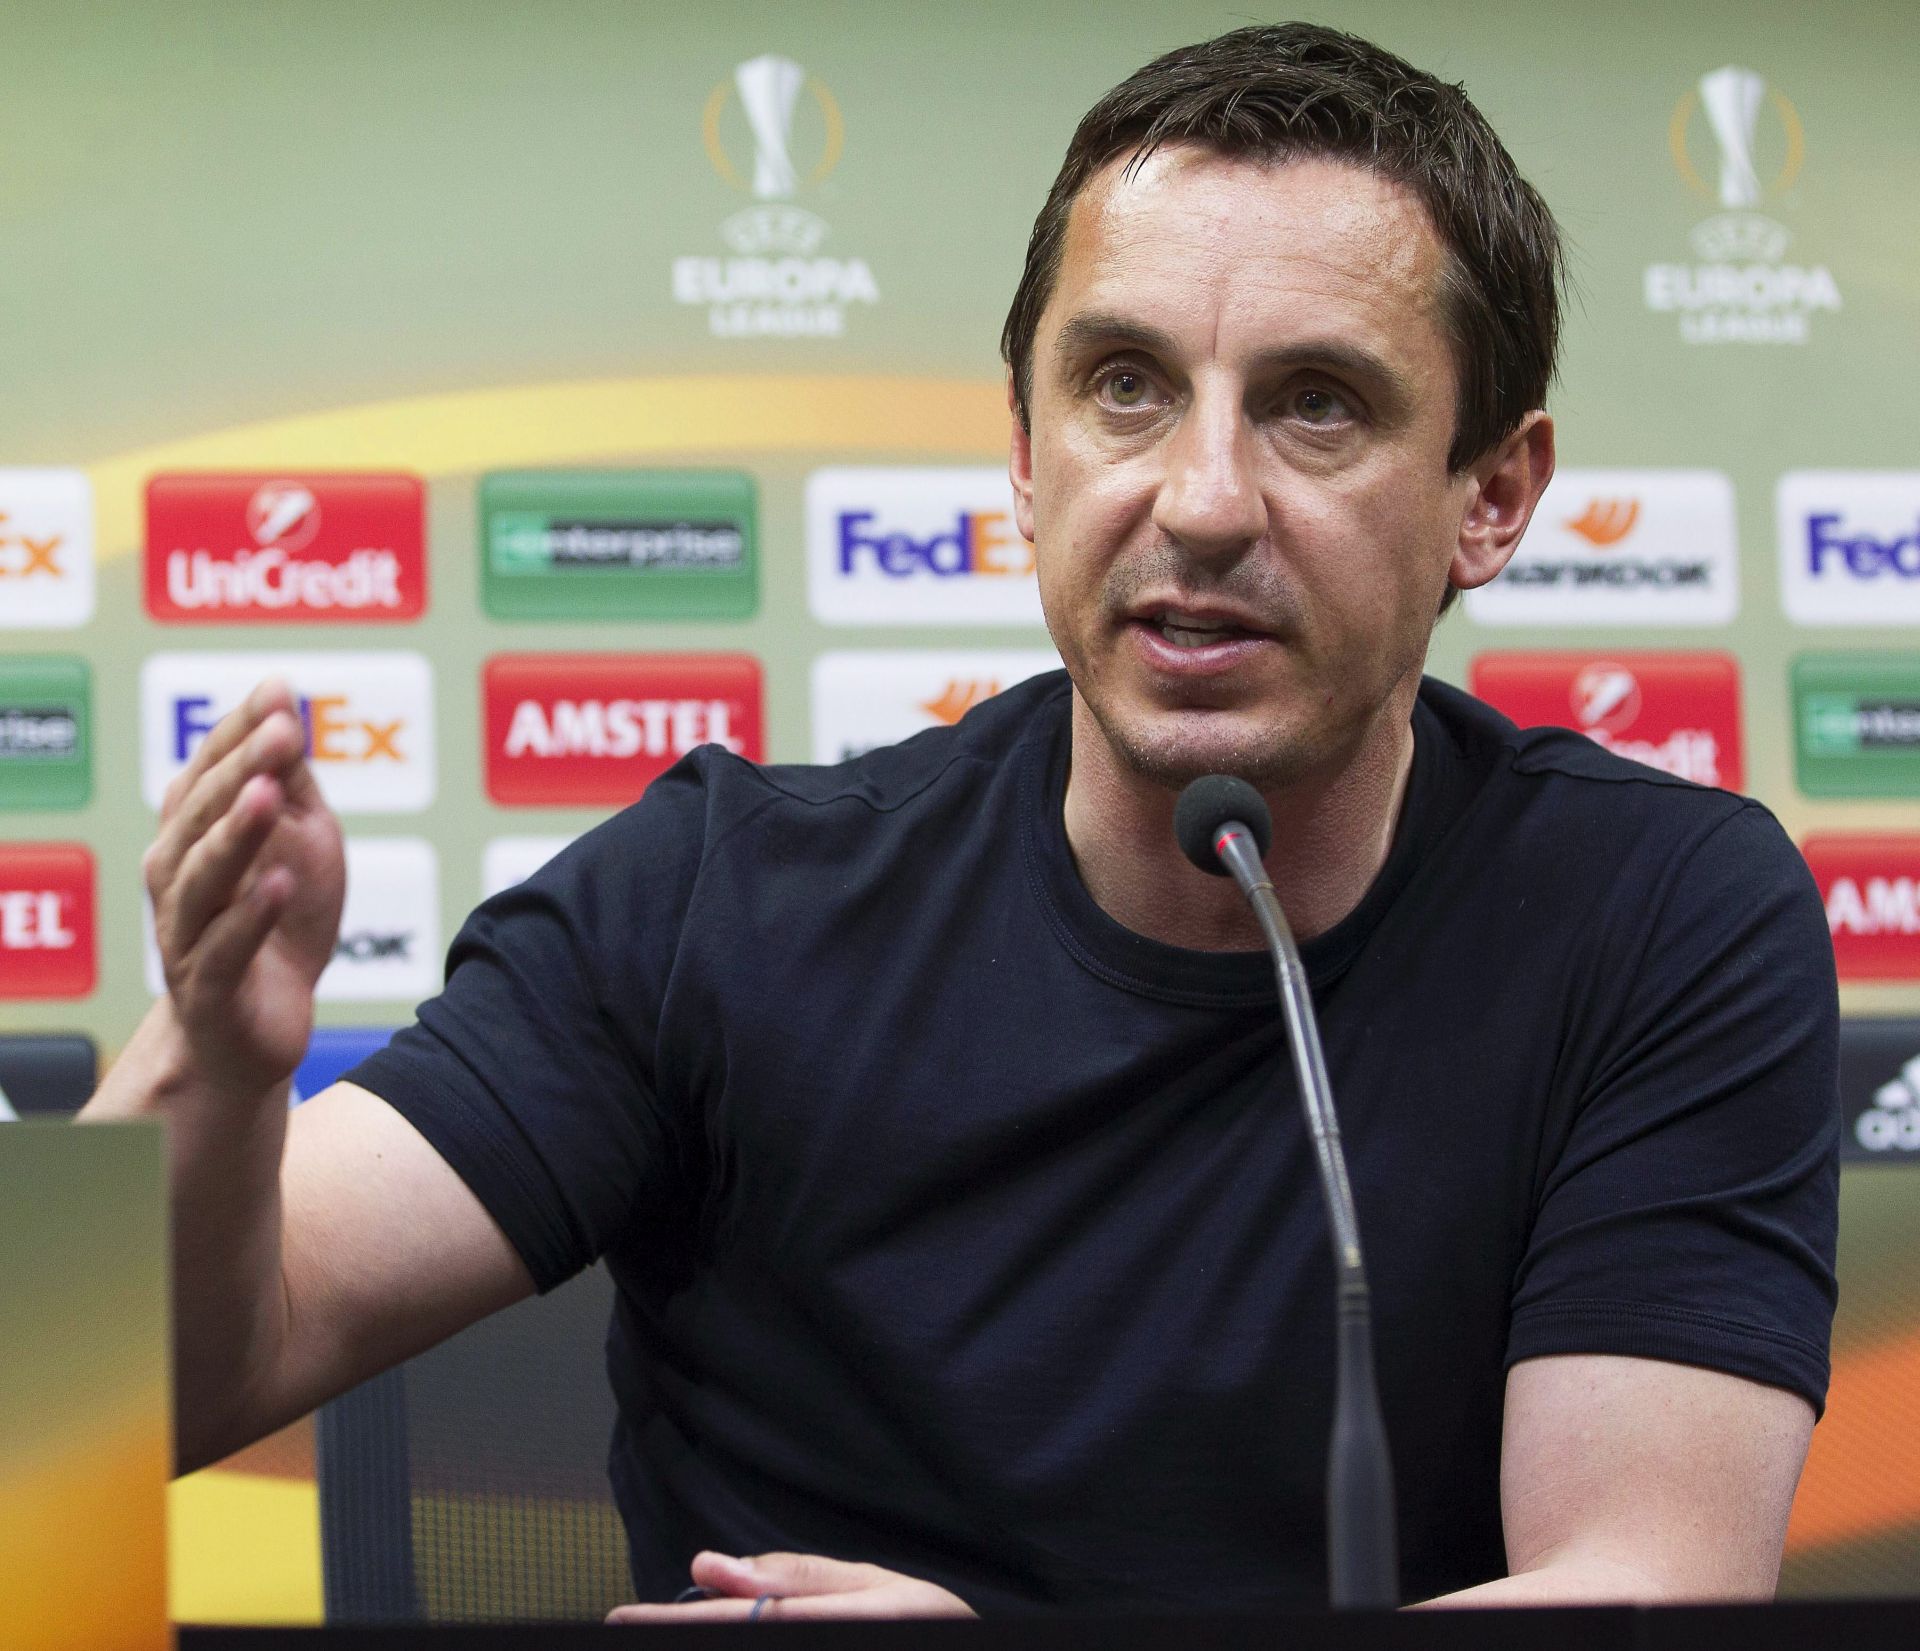 epa05214344 Valencia's English head coach Gary Neville speaks during a press conference in Valencia, eastern Spain, 16 March 2016. Valencia CF will face Athletic Bilbao in the UEFA Europa League round of 16, second leg soccer match on 17 March 2016.  EPA/MIGUEL ANGEL POLO